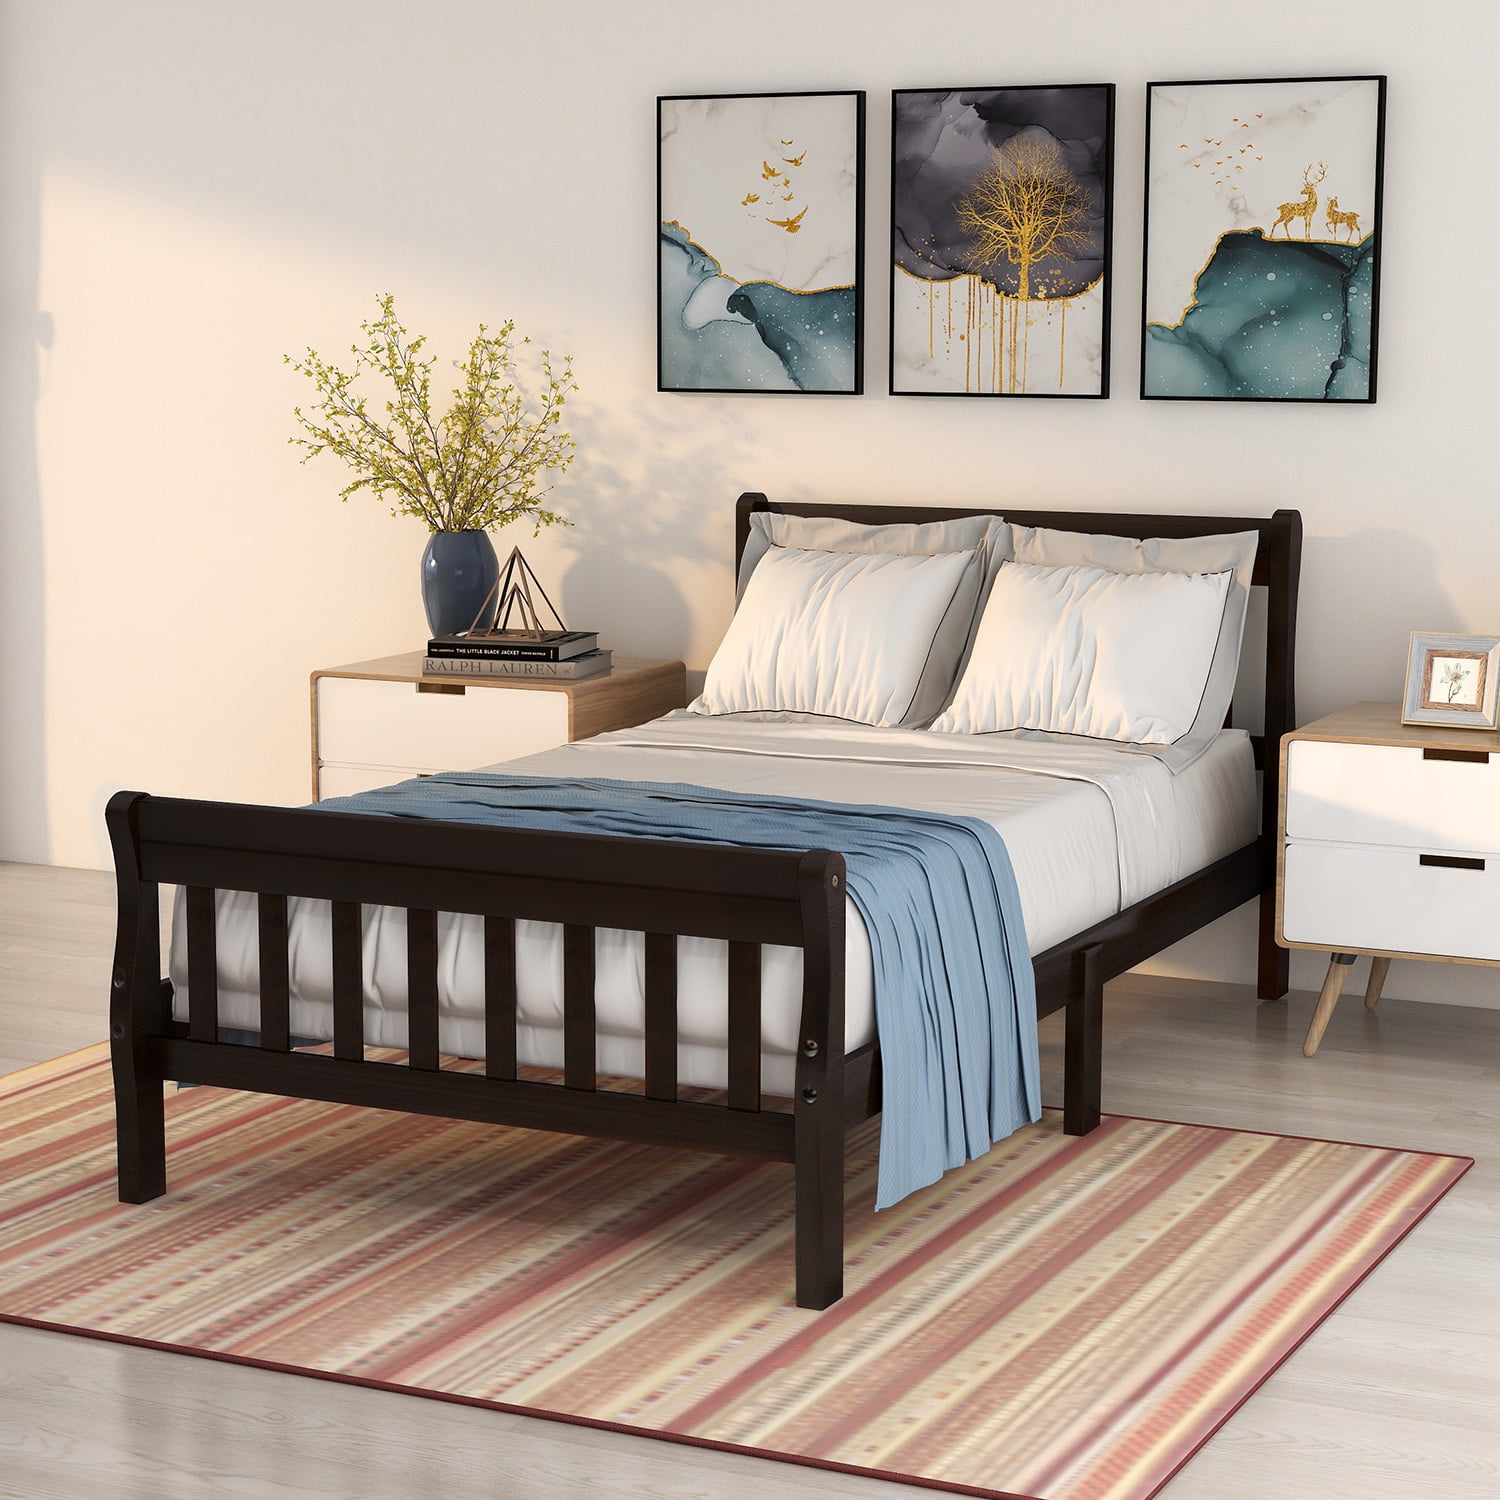 Details about   Platform Bed With Headboard Wooden Slat Bed Frame For Home Full/Queen/Twin Size 